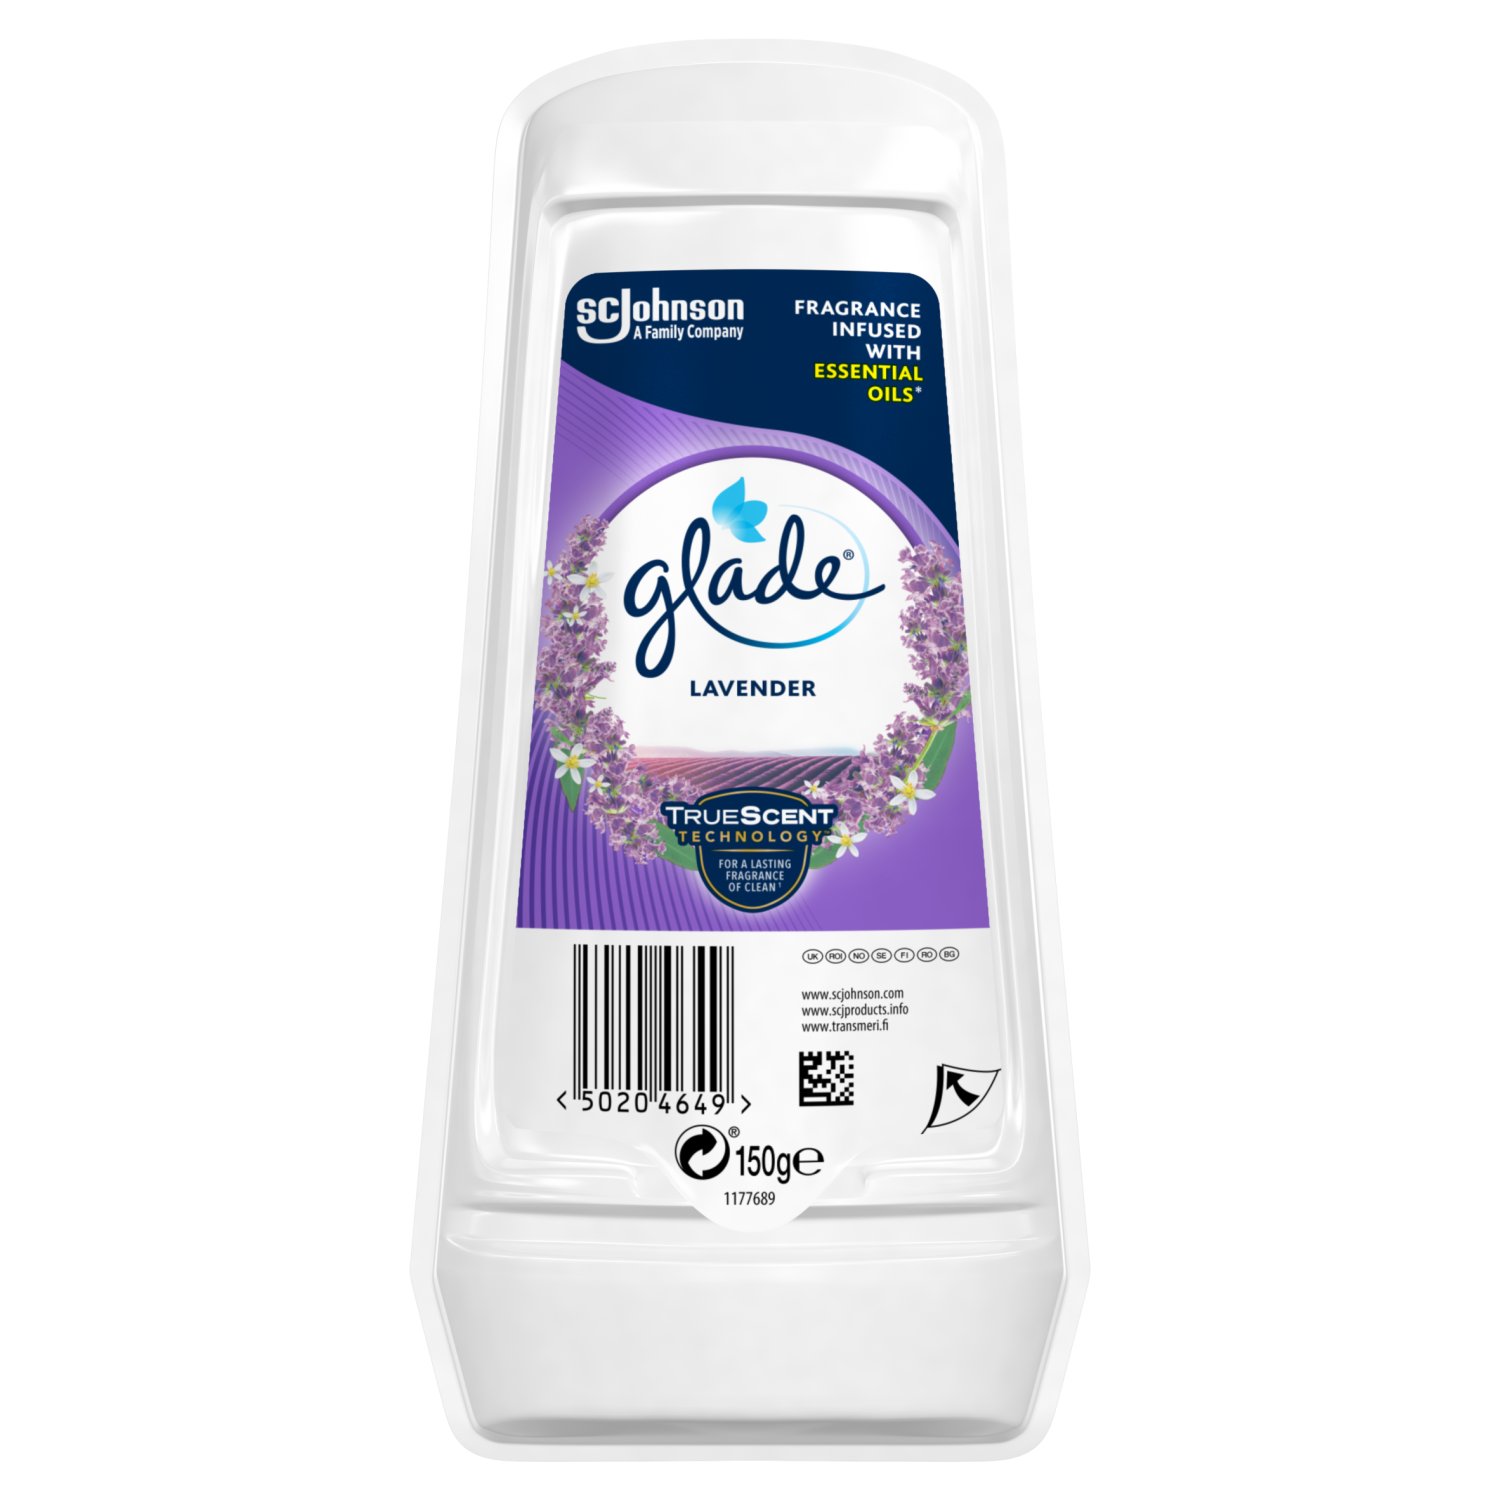 With a variety of fragrances to choose from, the Glade Solid Gel Air Freshener is the perfectly practical way to add continuous fragrance to your home. Just peel off the sticker to release the rich fragrance within.